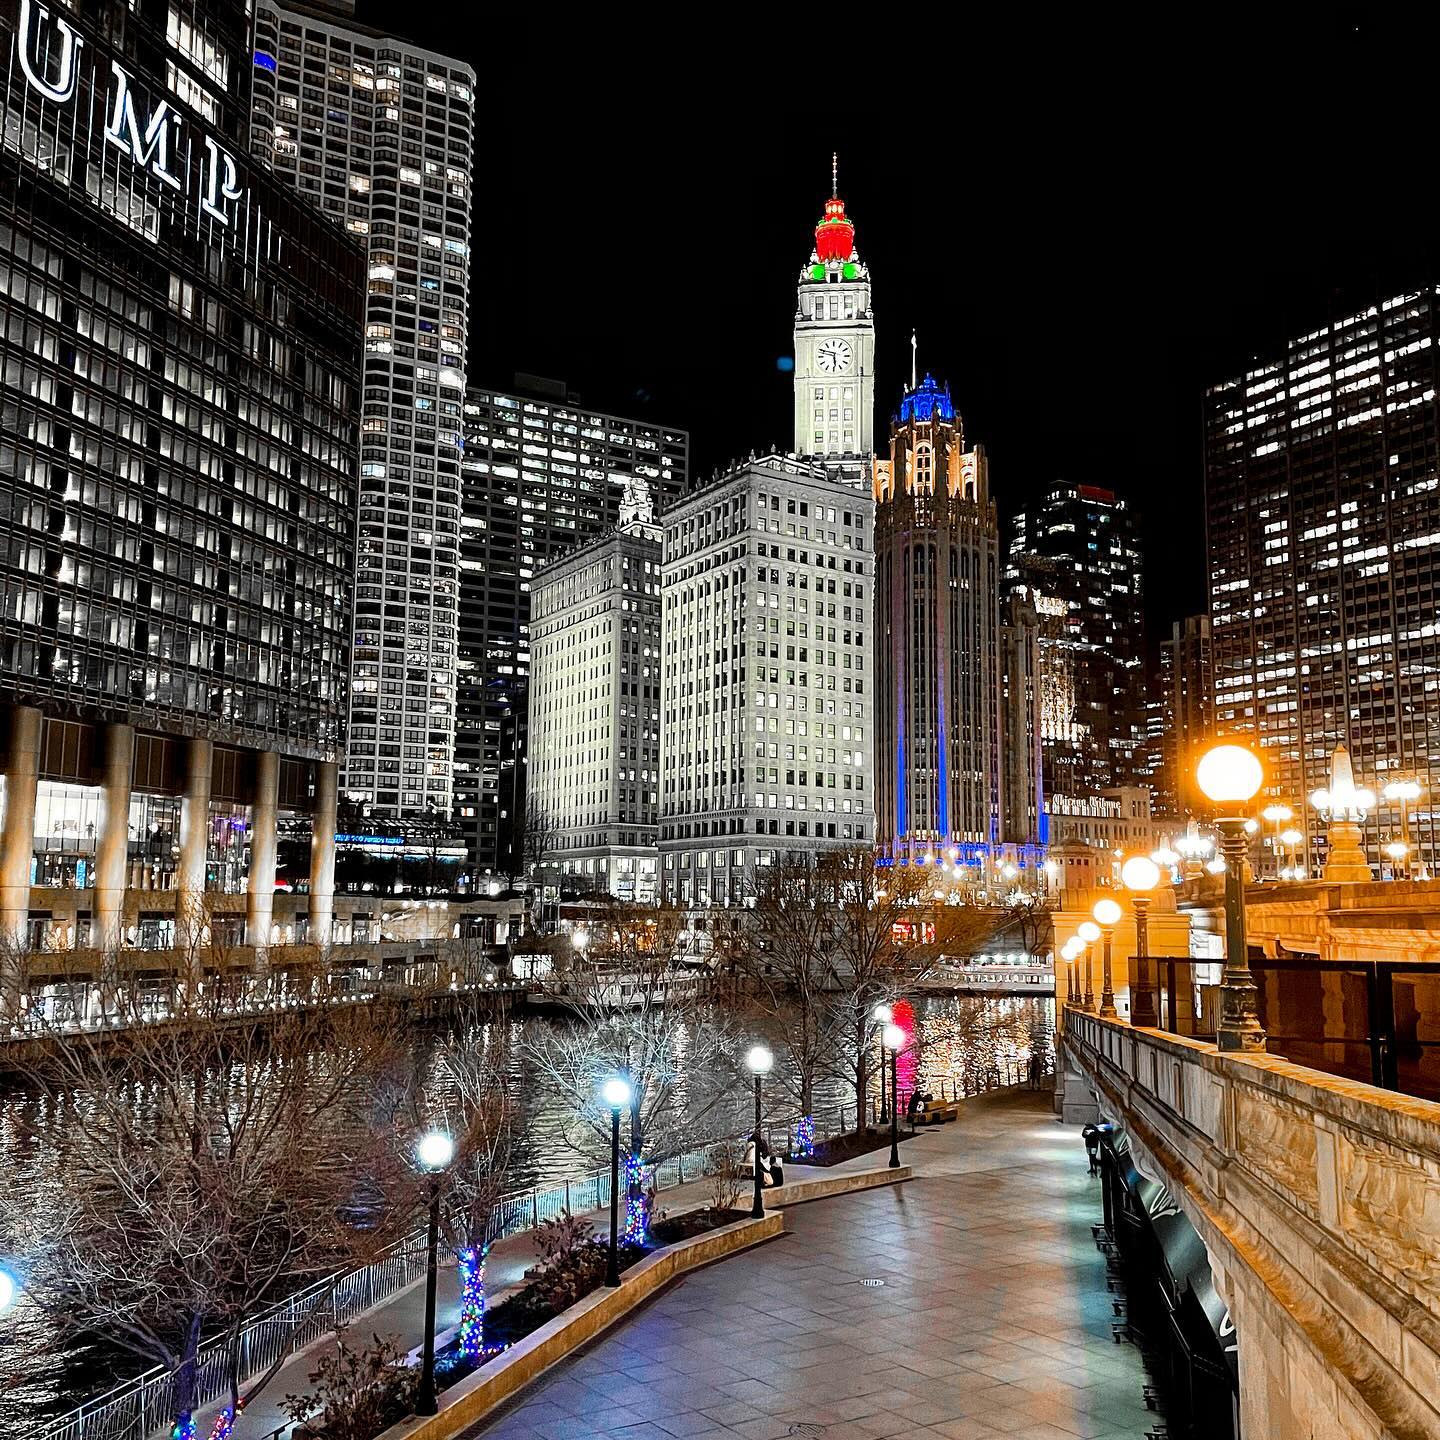 River Walk - It is a pavement near the Chicago River with a picturesque view